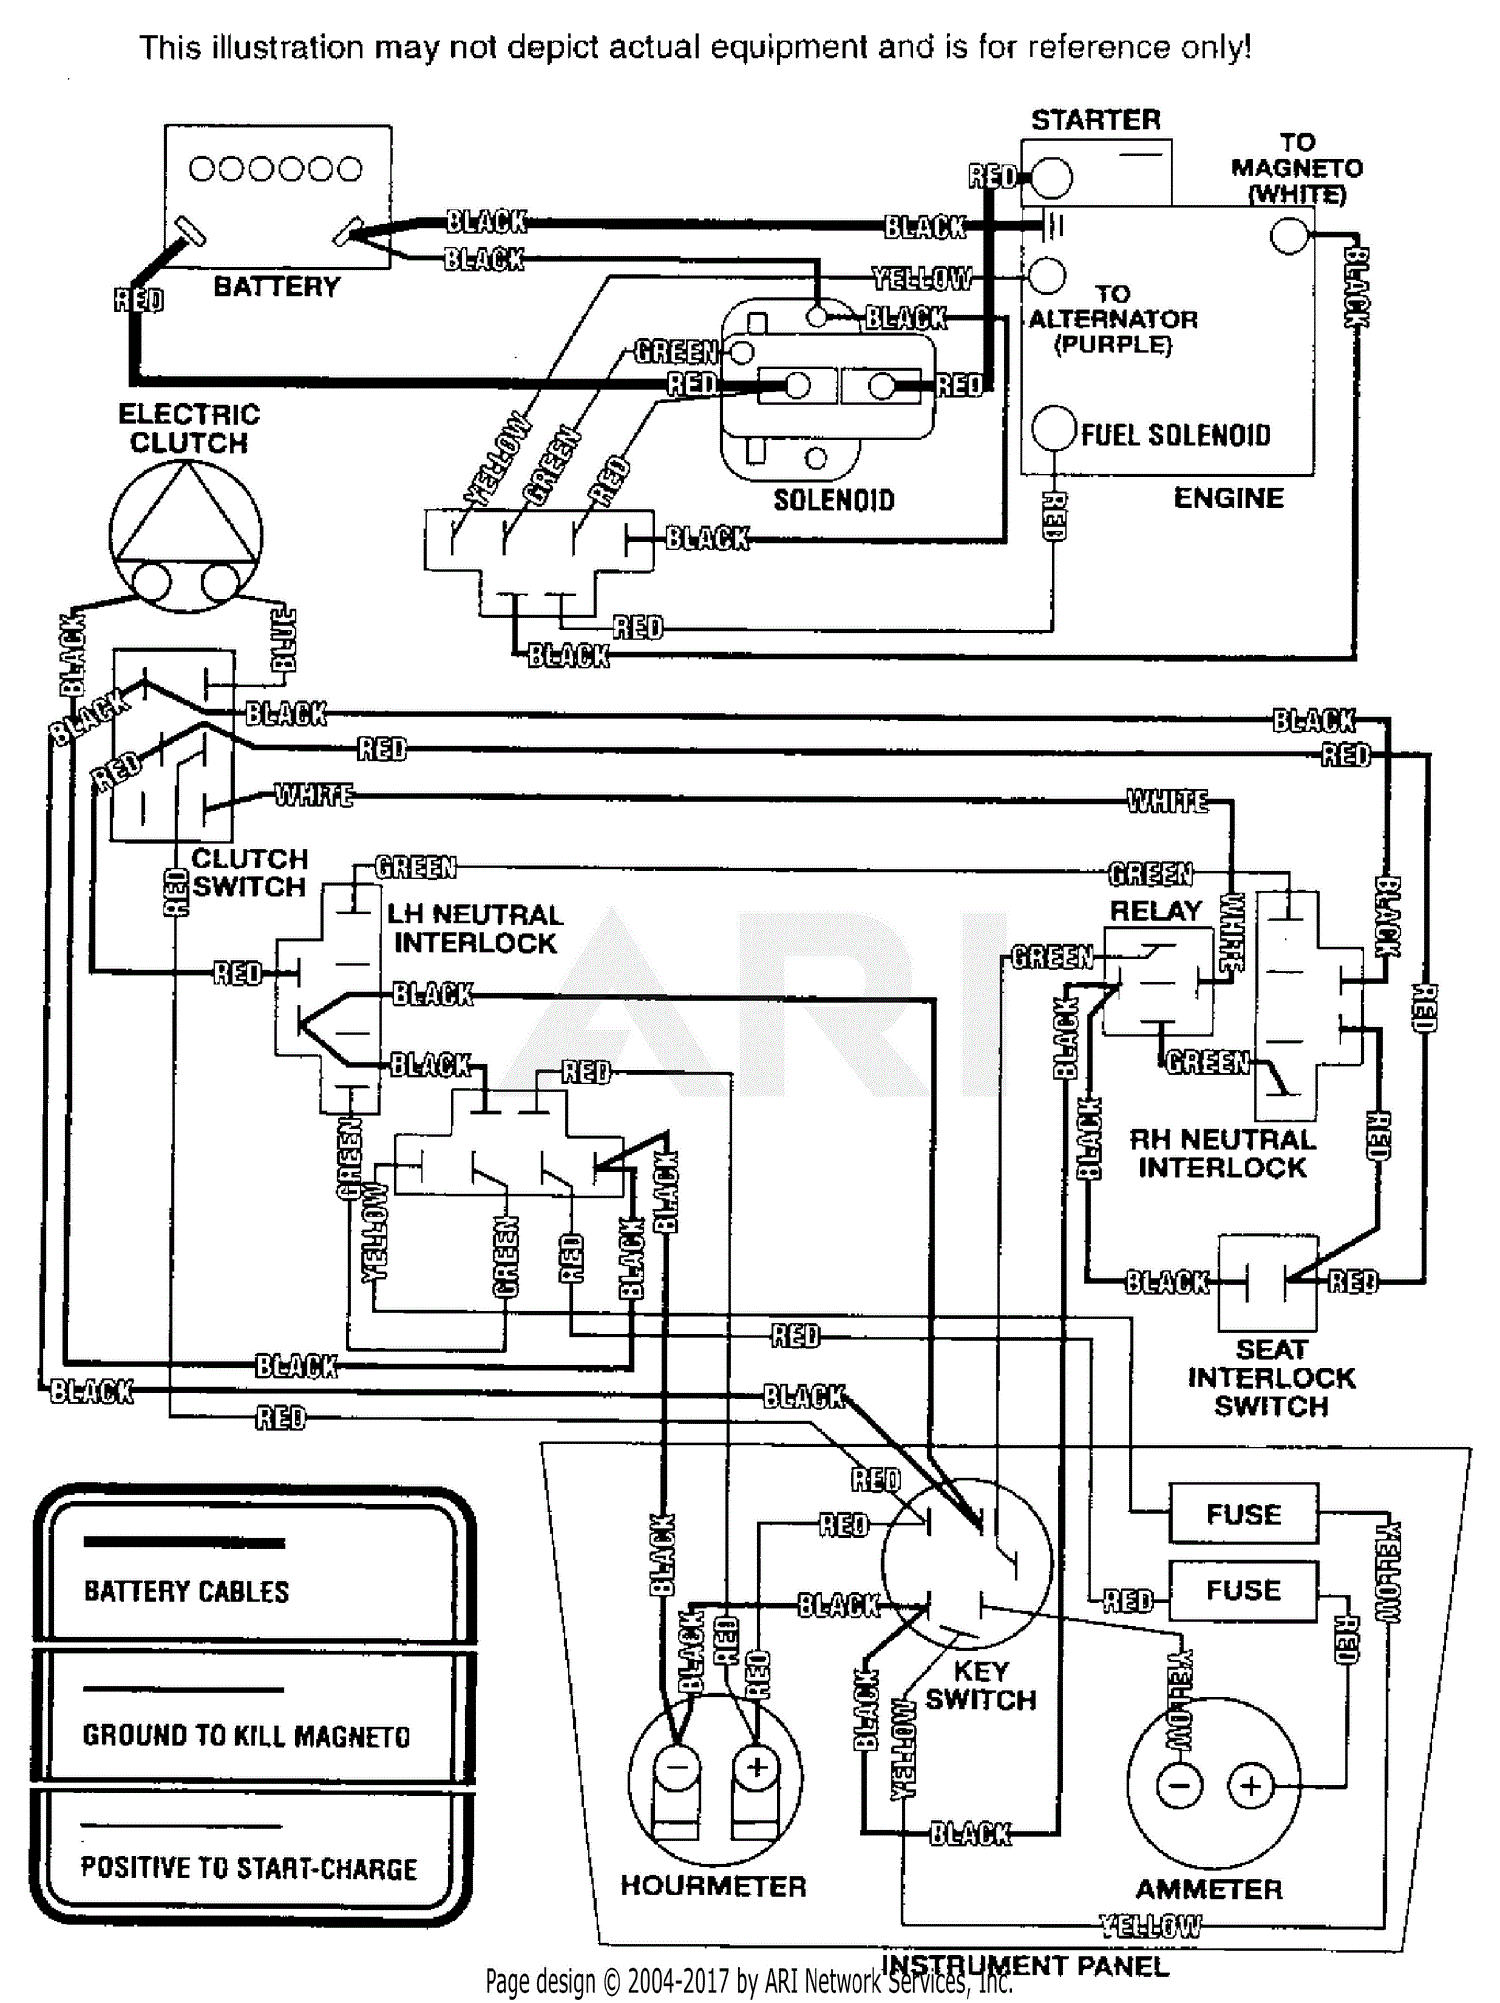 briggs and stratton 9hp wiring diagram